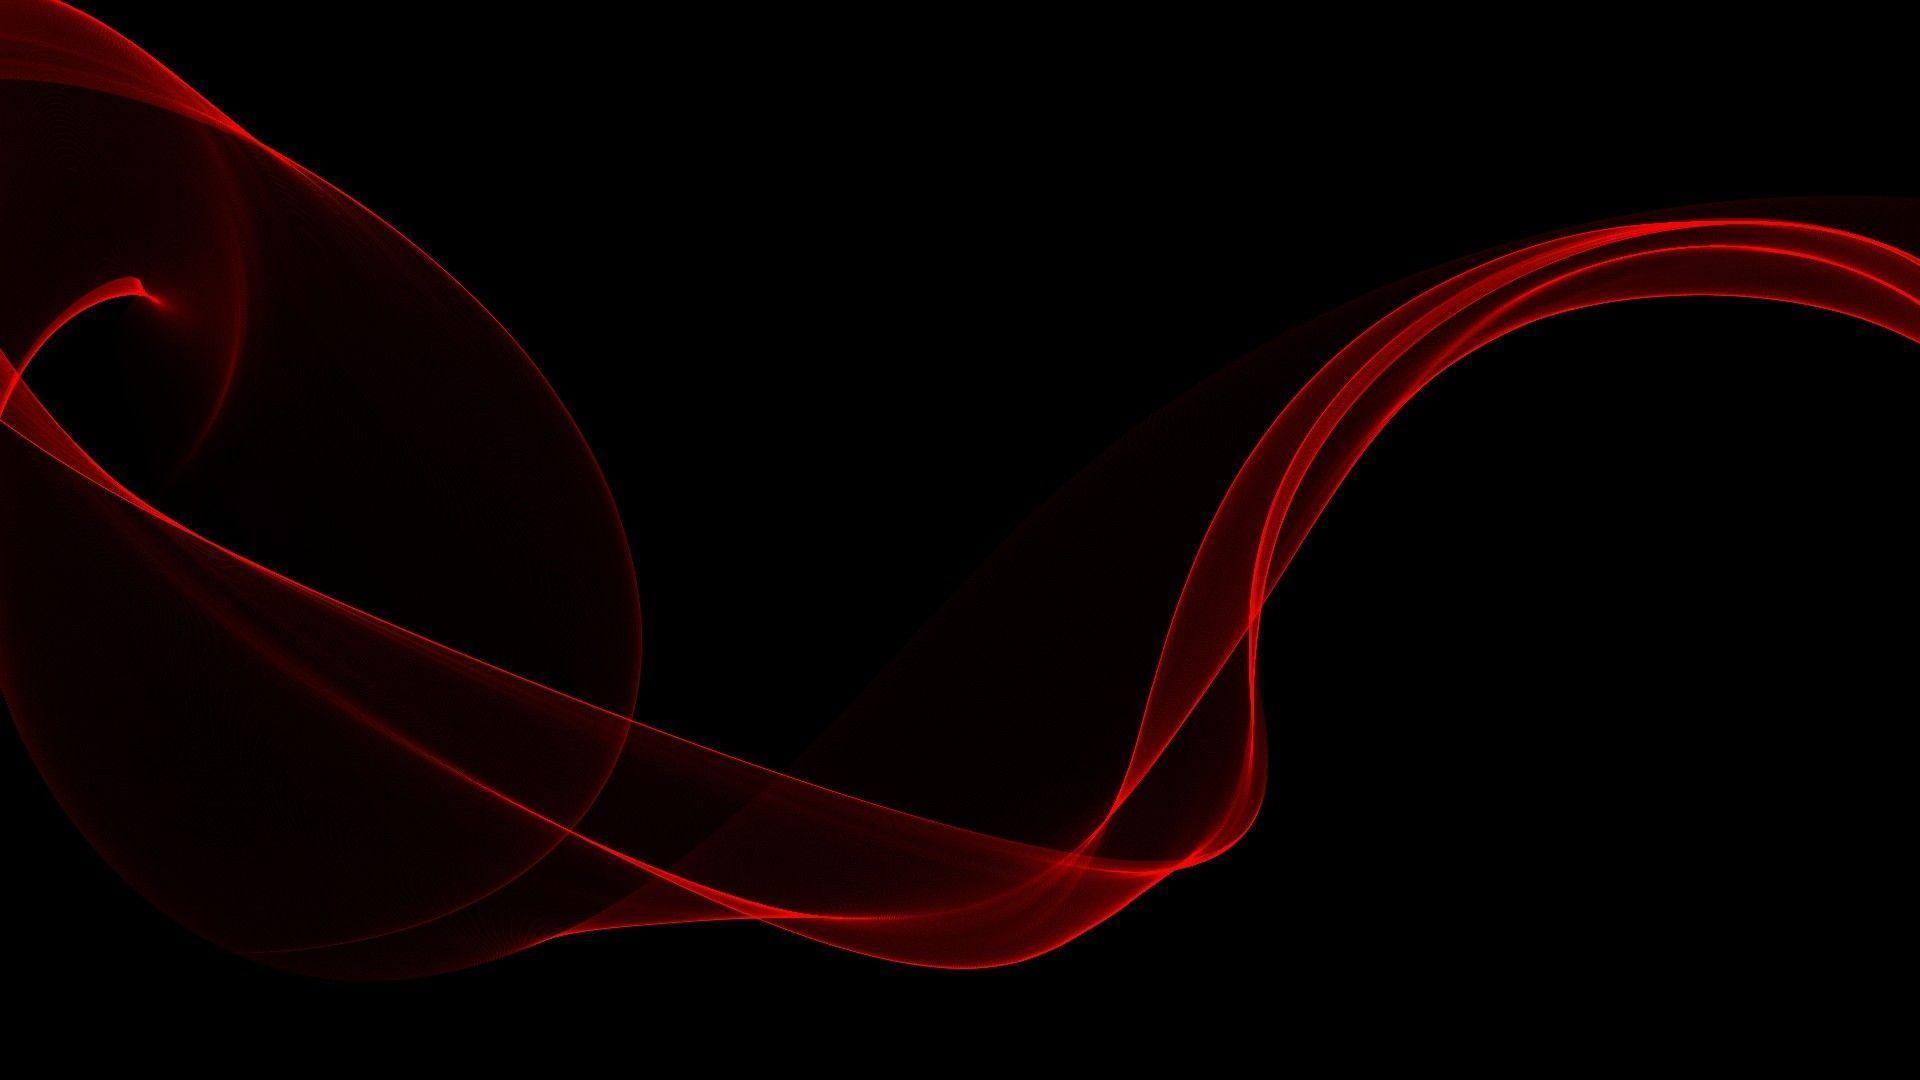 1920x1080 Black Abstract 4k 1080p Laptop Full Hd Wallpaper Hd Abstract Porn Sex Picture